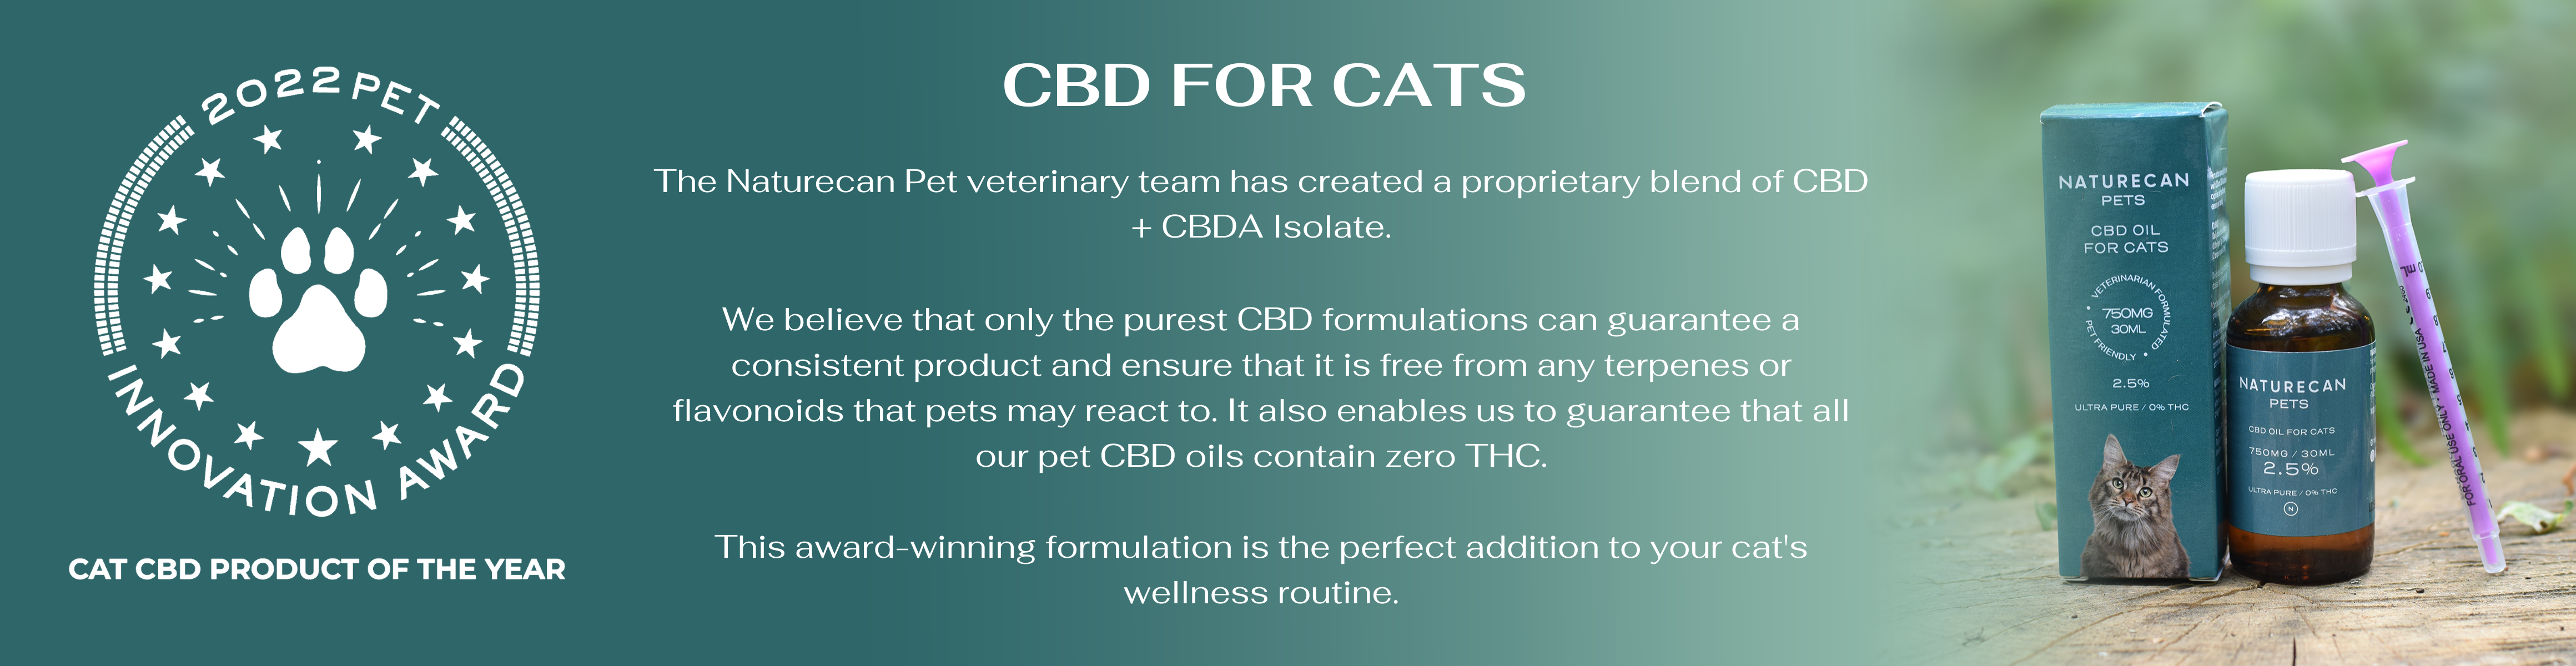 CBD for cats - Our proprietary blend 